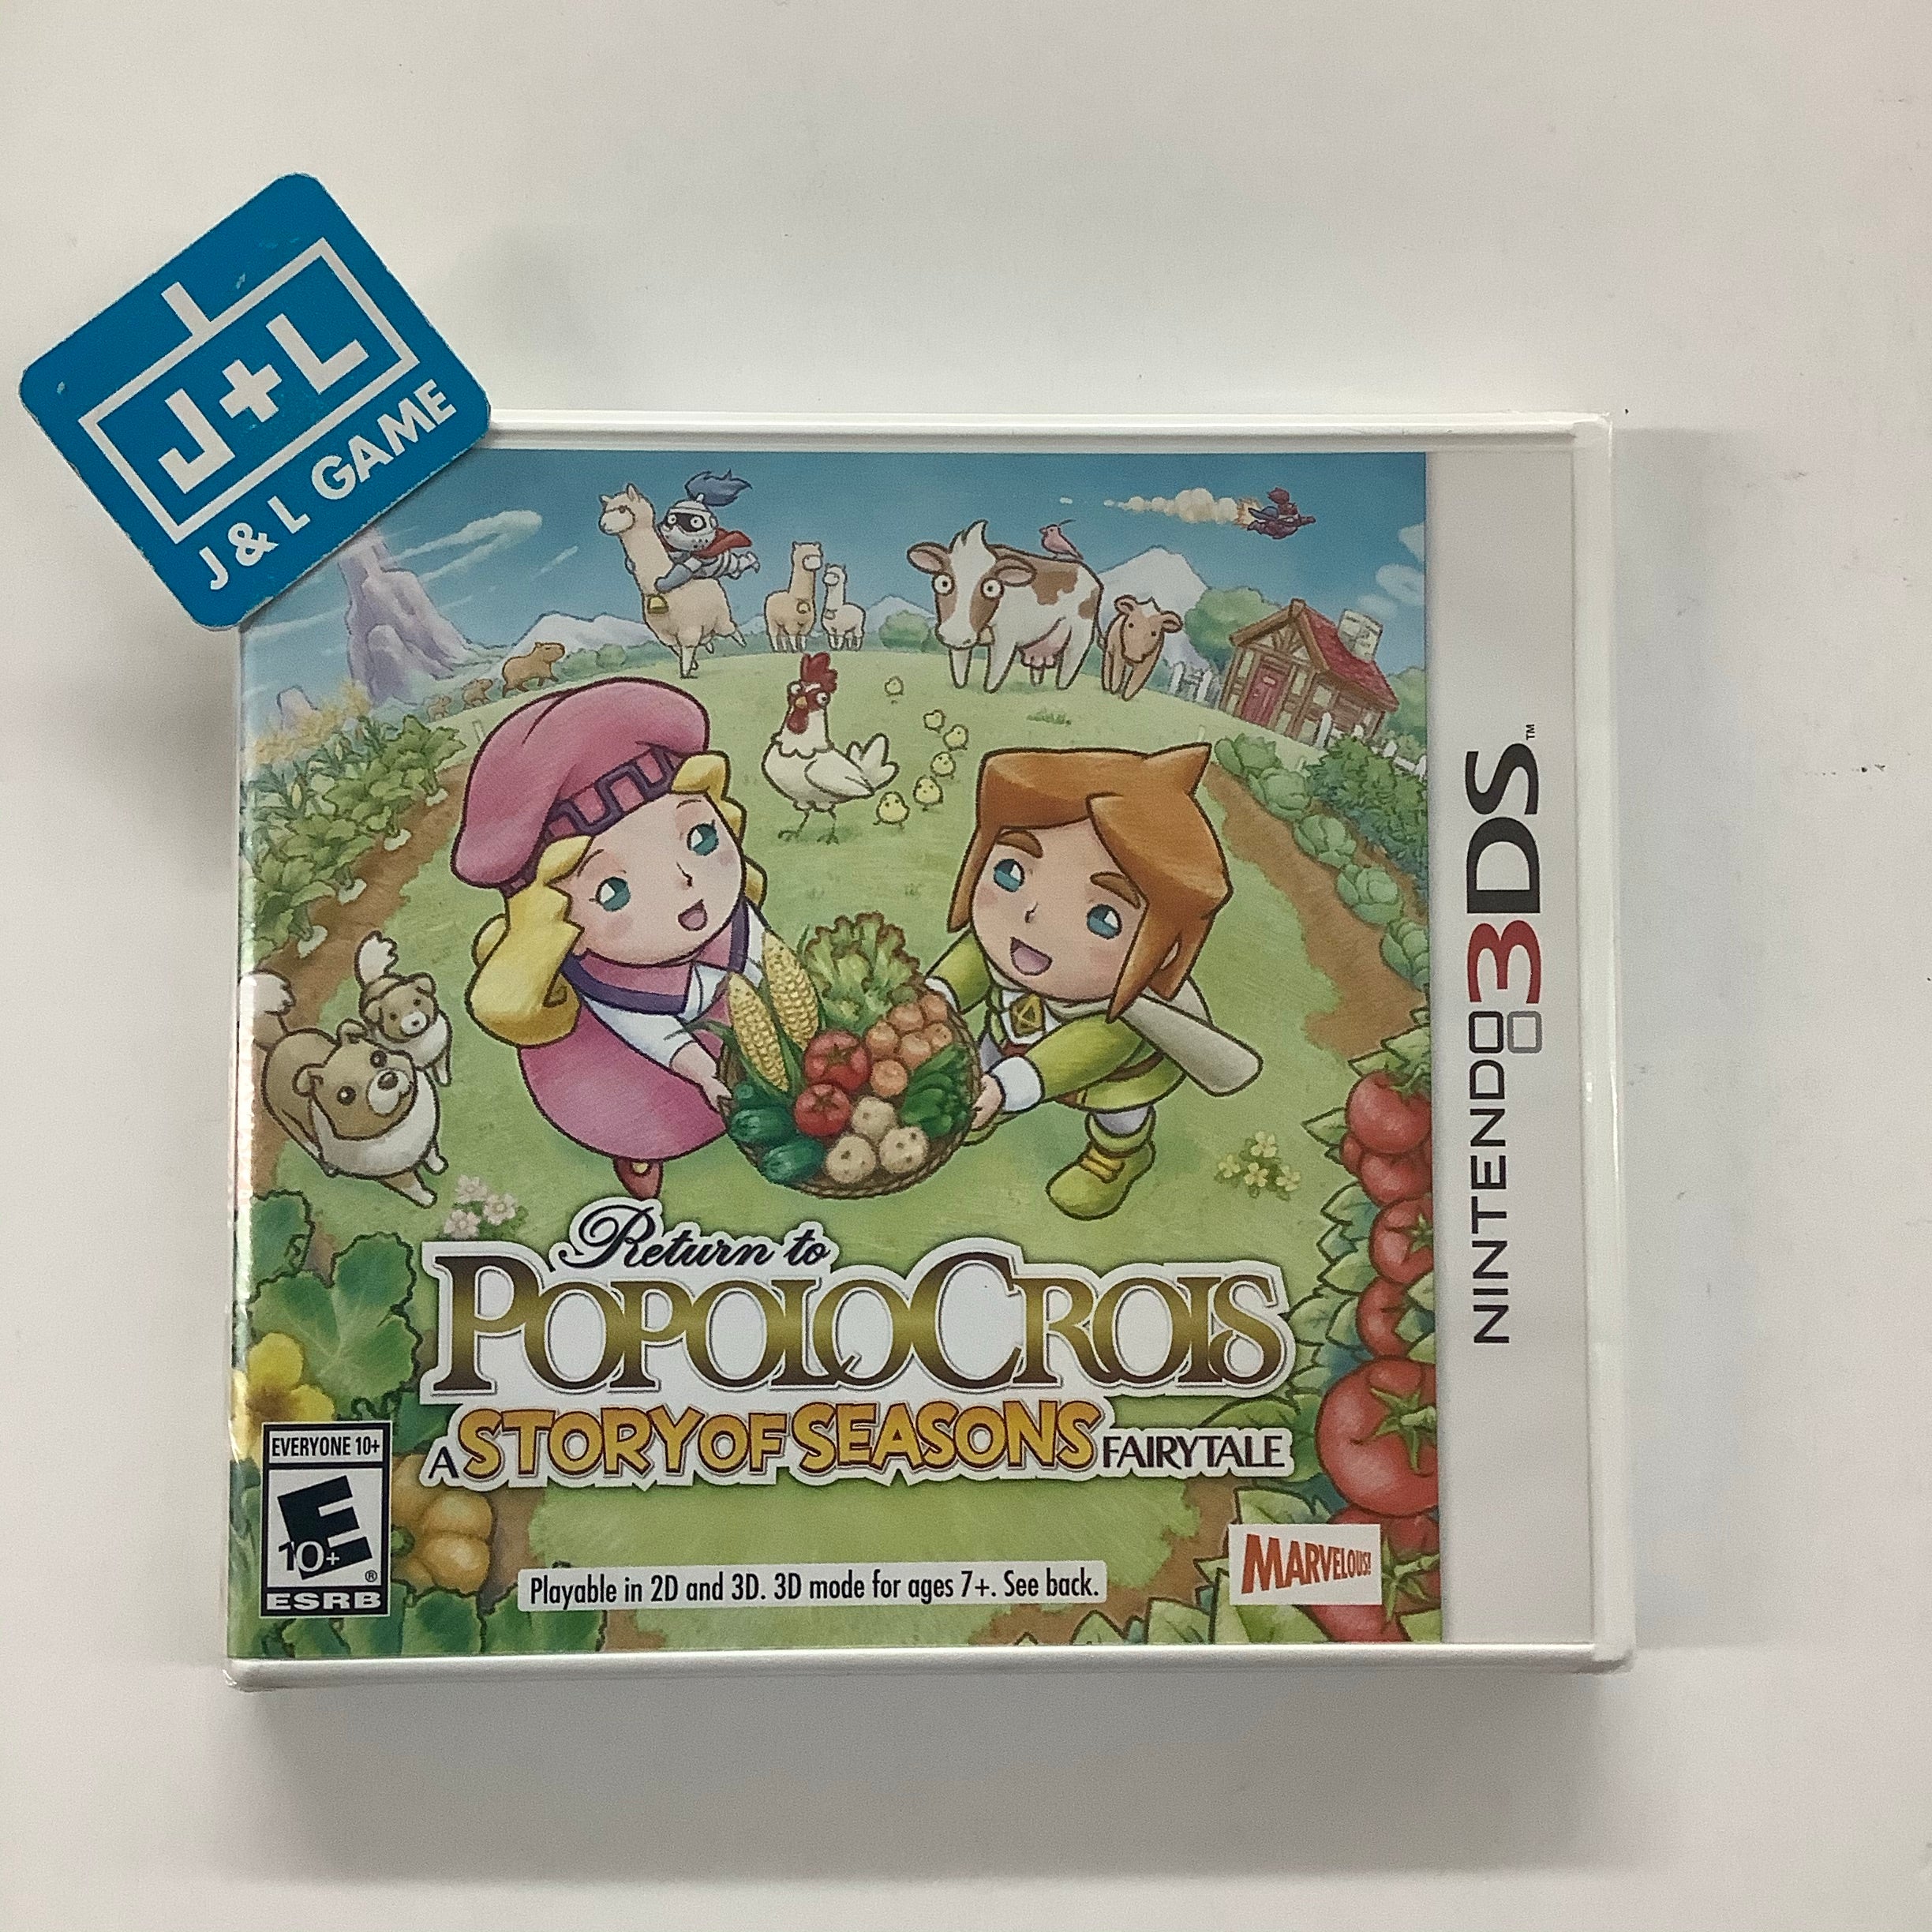 Return to PopoloCrois: A Story of Seasons Fairytale - Nintendo 3DS Video Games XSEED Games   